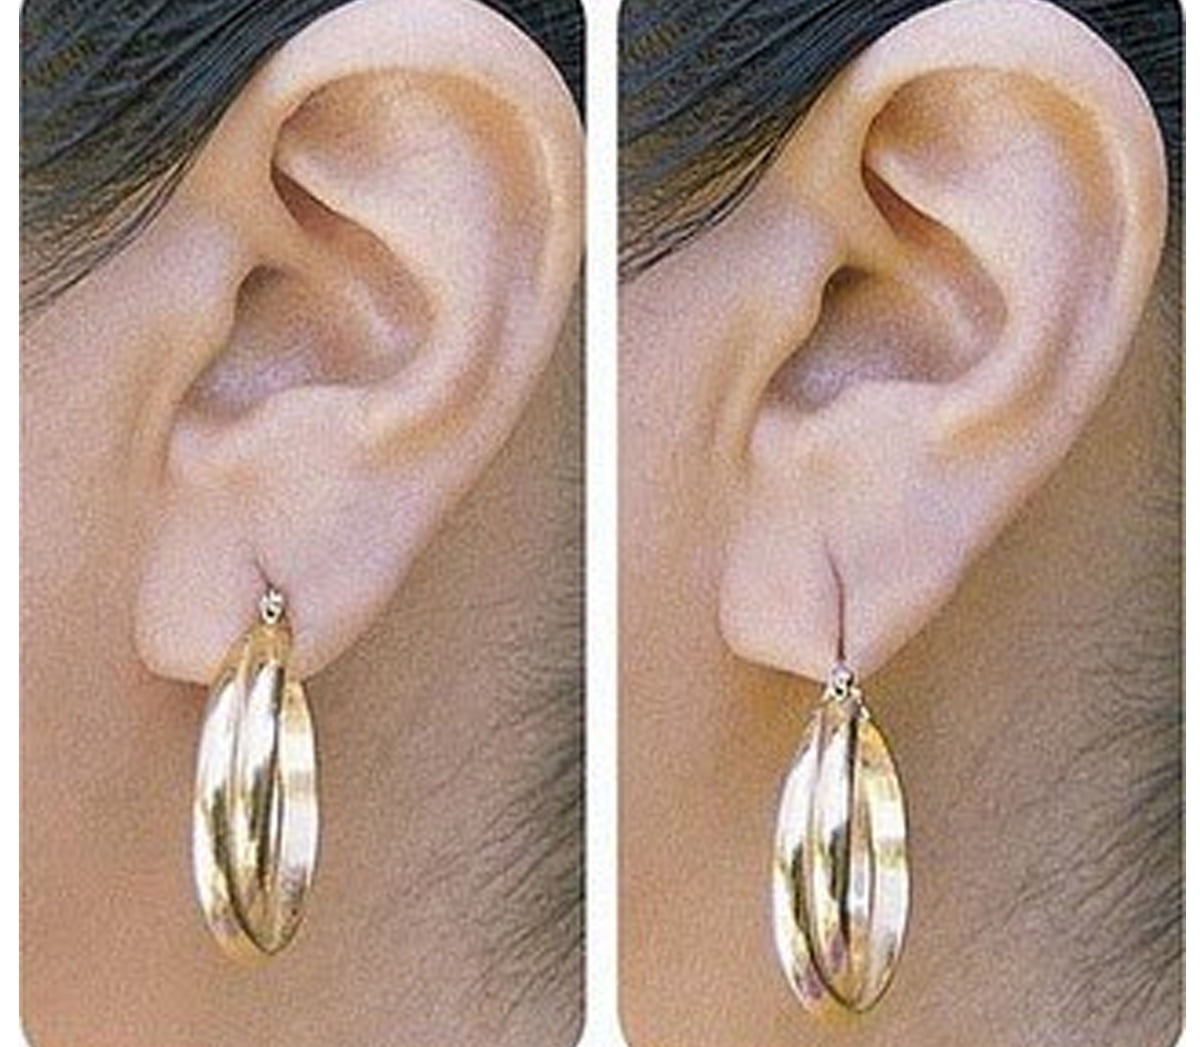 LOBE WONDER Earring Support Patches 60 Lobe Wonder Patches FREE